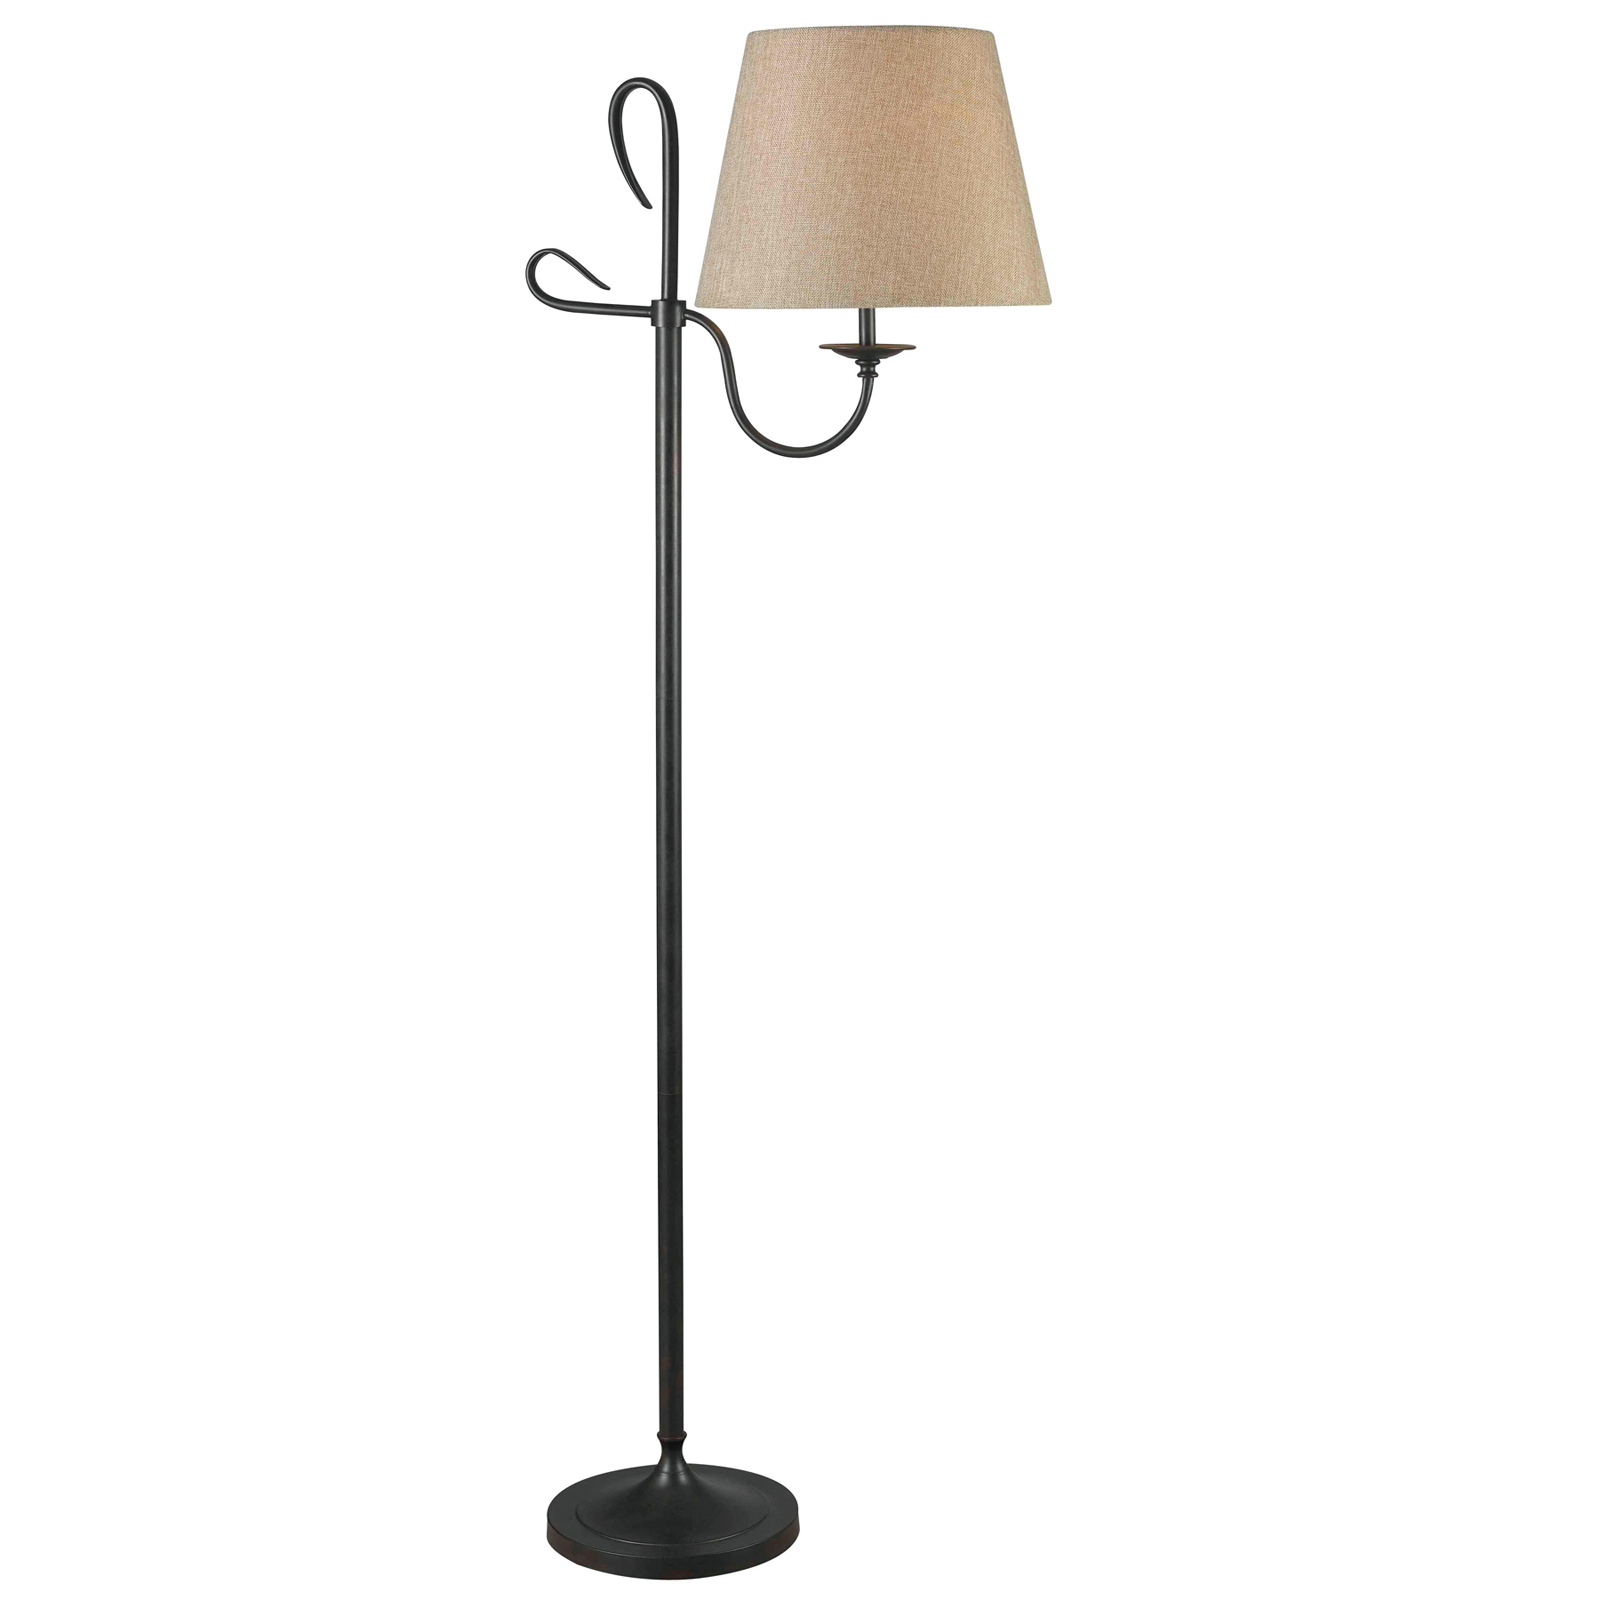 Kmart Floor Lamps R On Simple For Table Wooden Spotlight intended for size 1600 X 1600